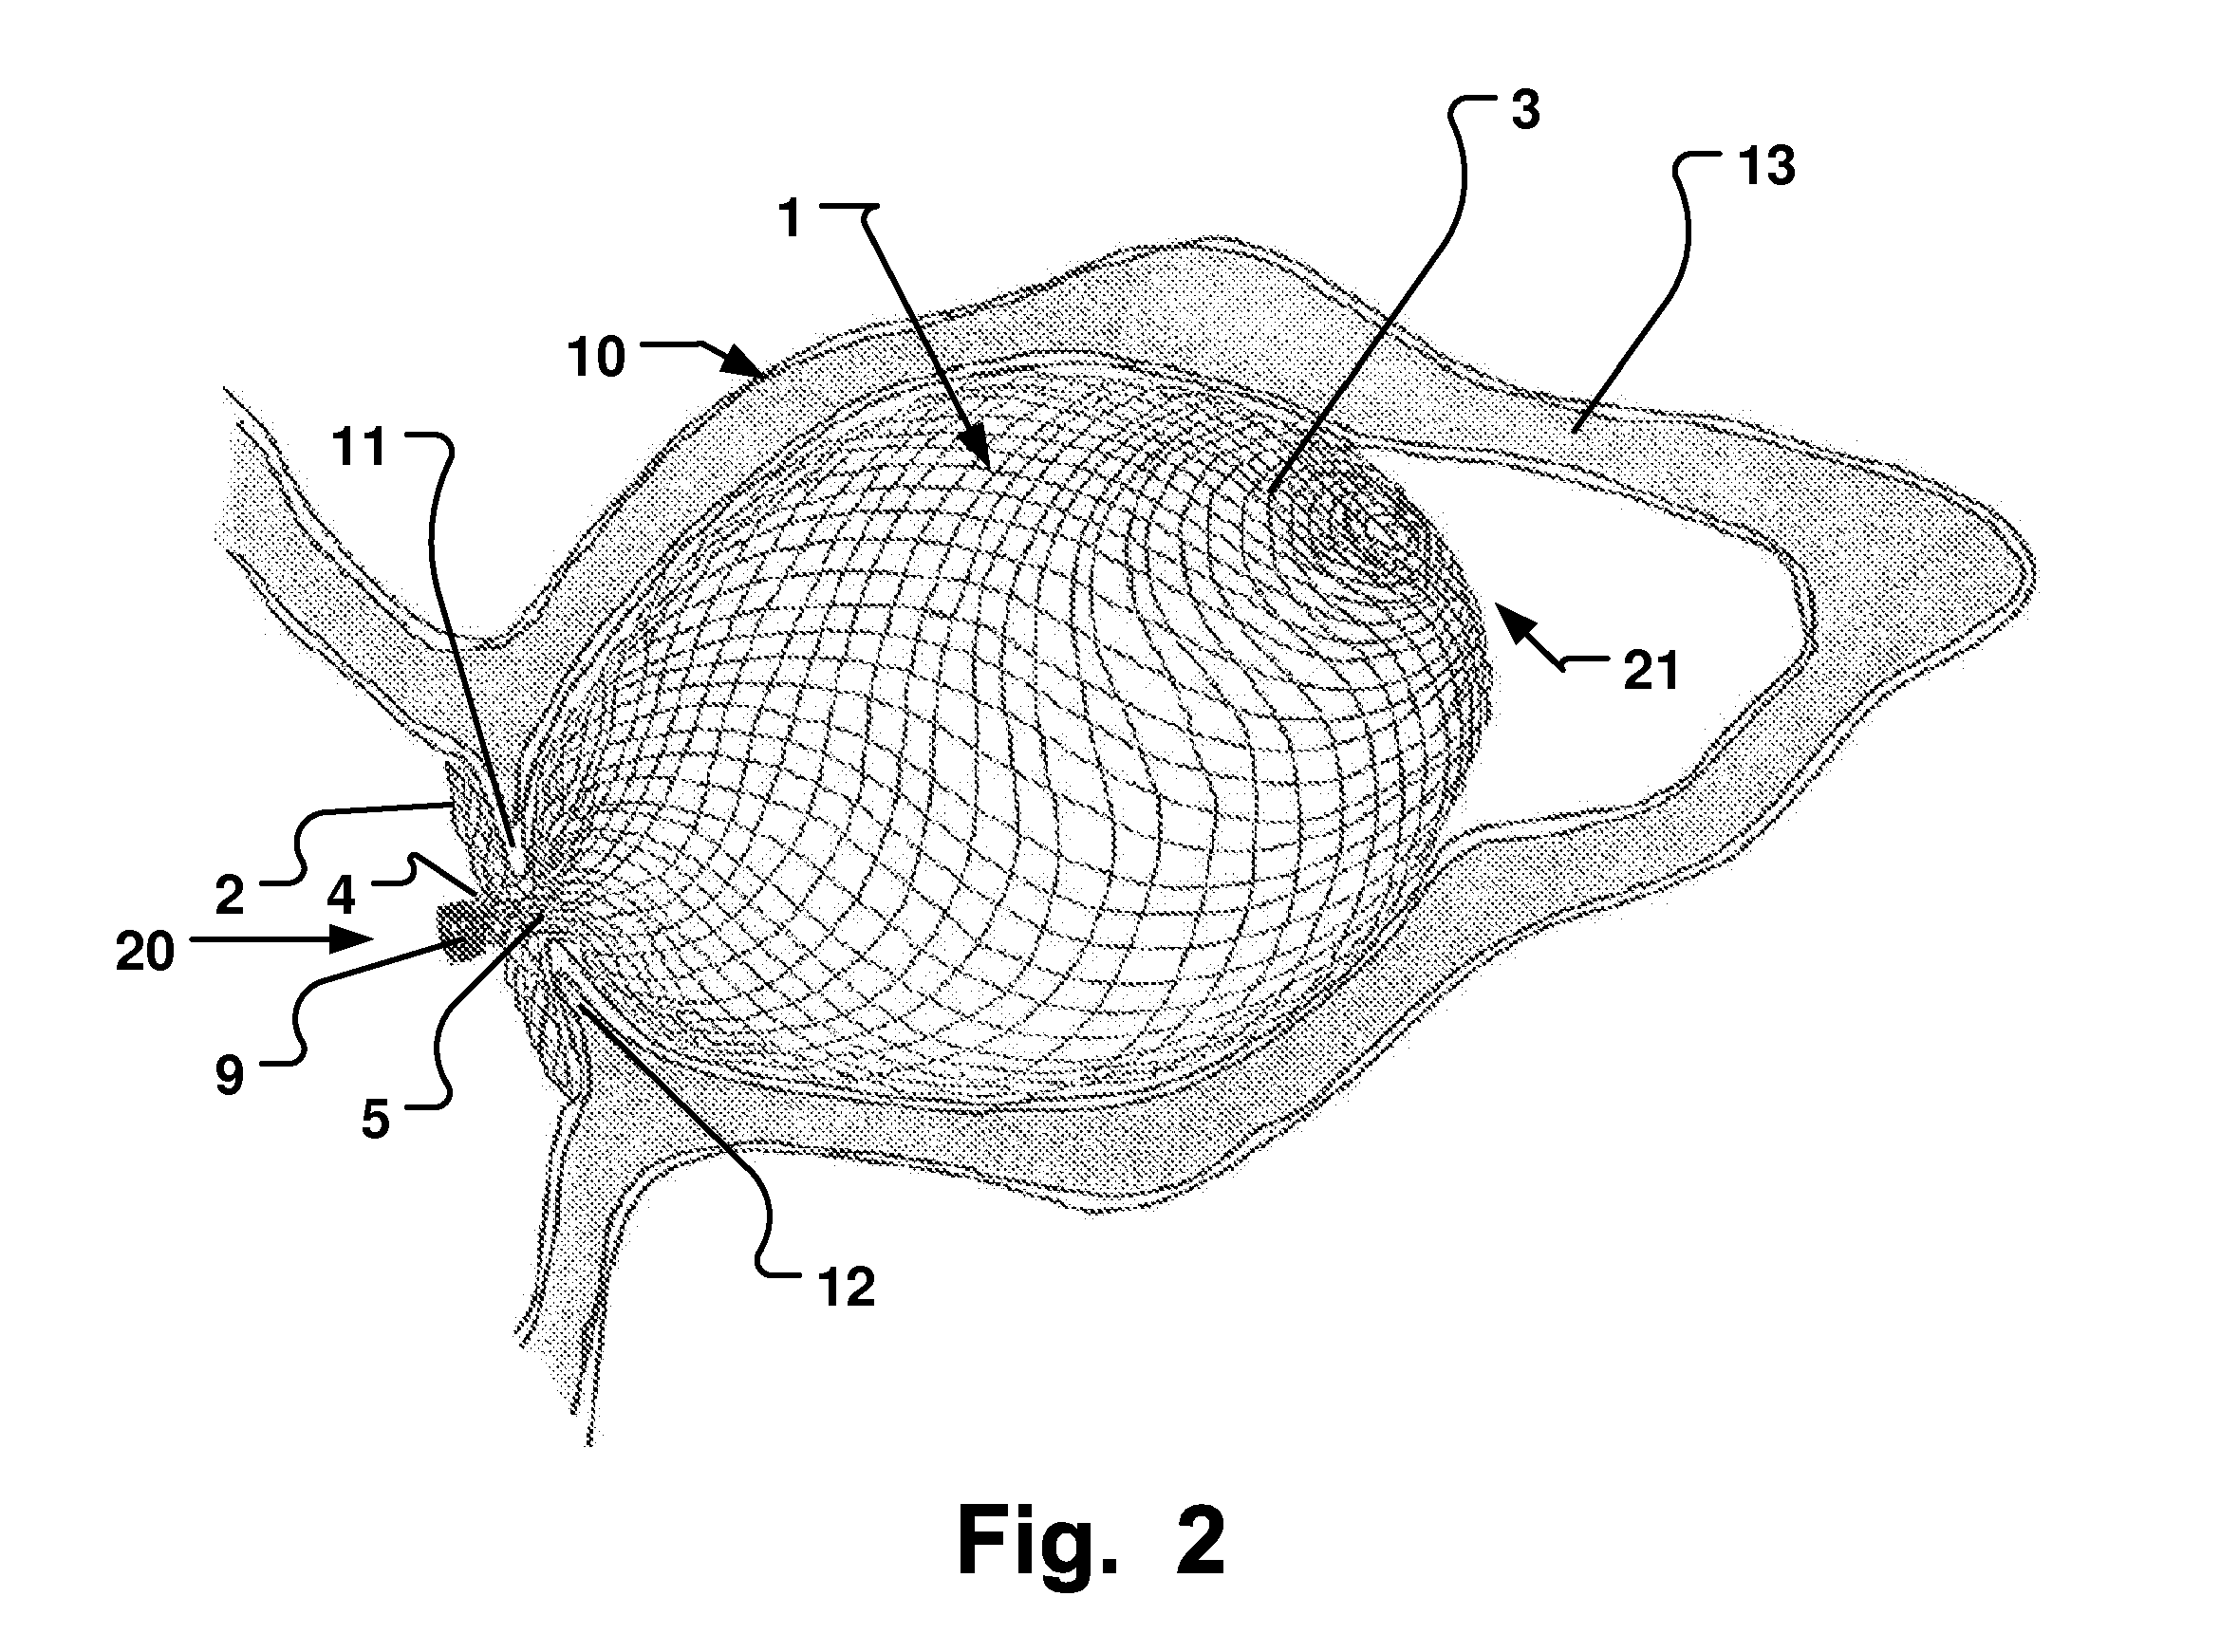 Occluder For Occluding an Atrial Appendage and Production Process Therefor